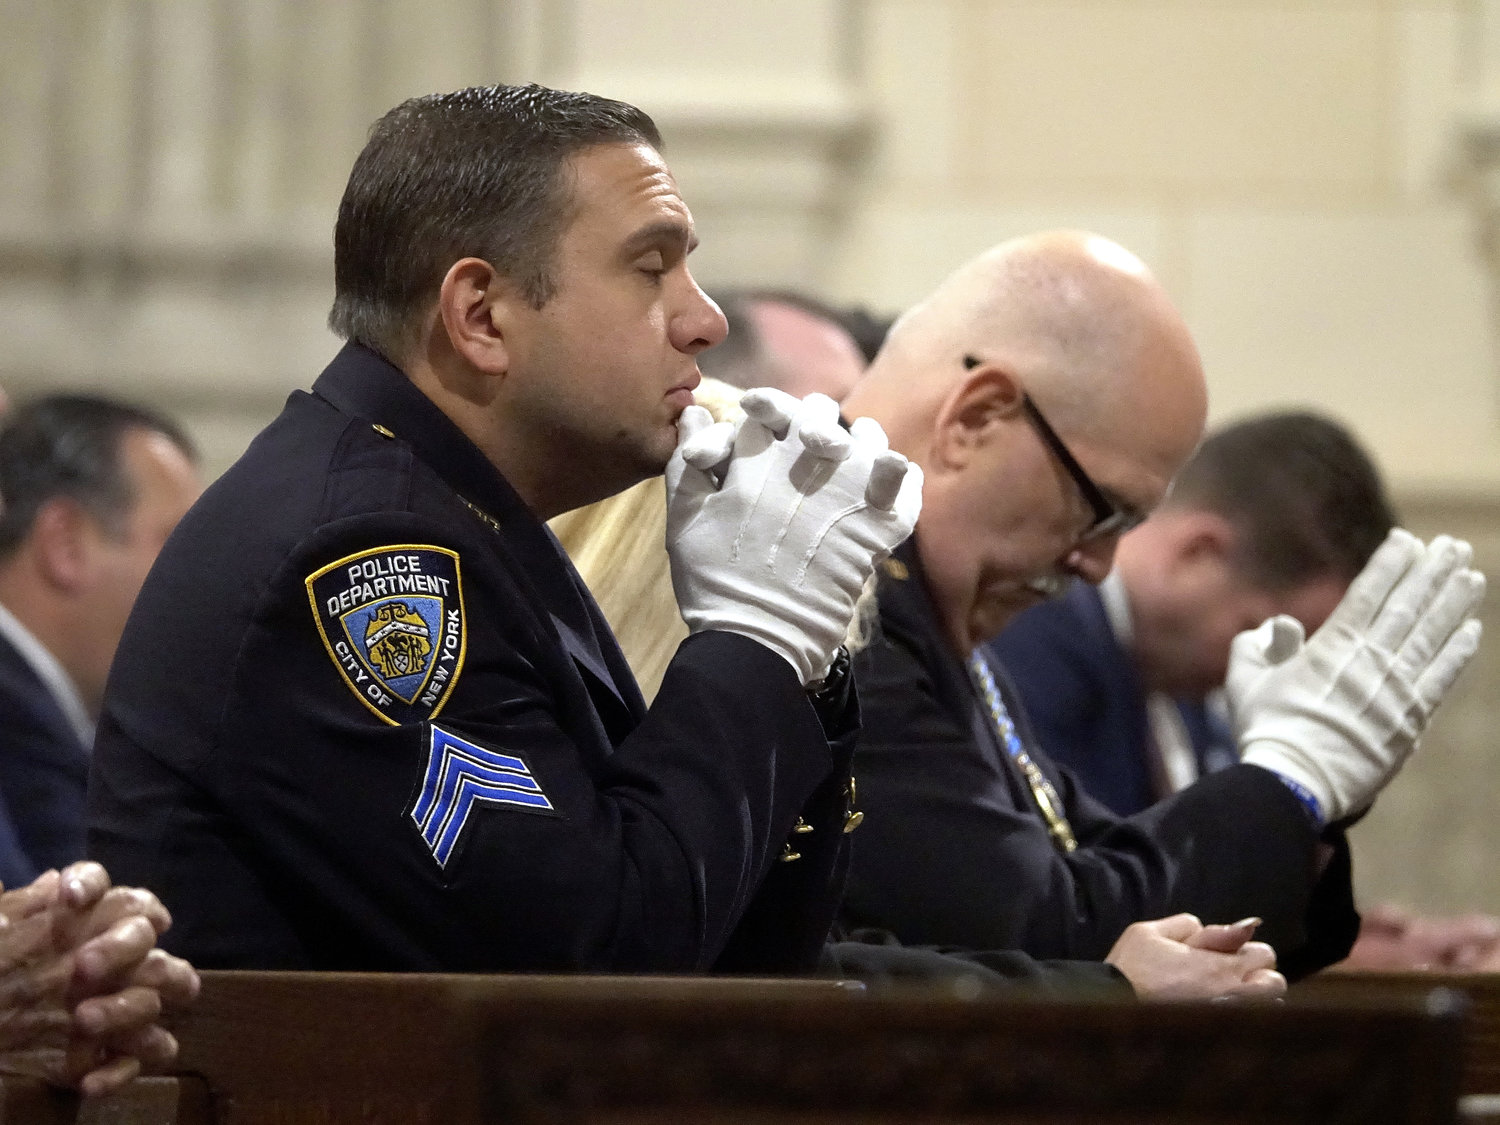 Members of the NYPD kneel in prayer during the Mass.